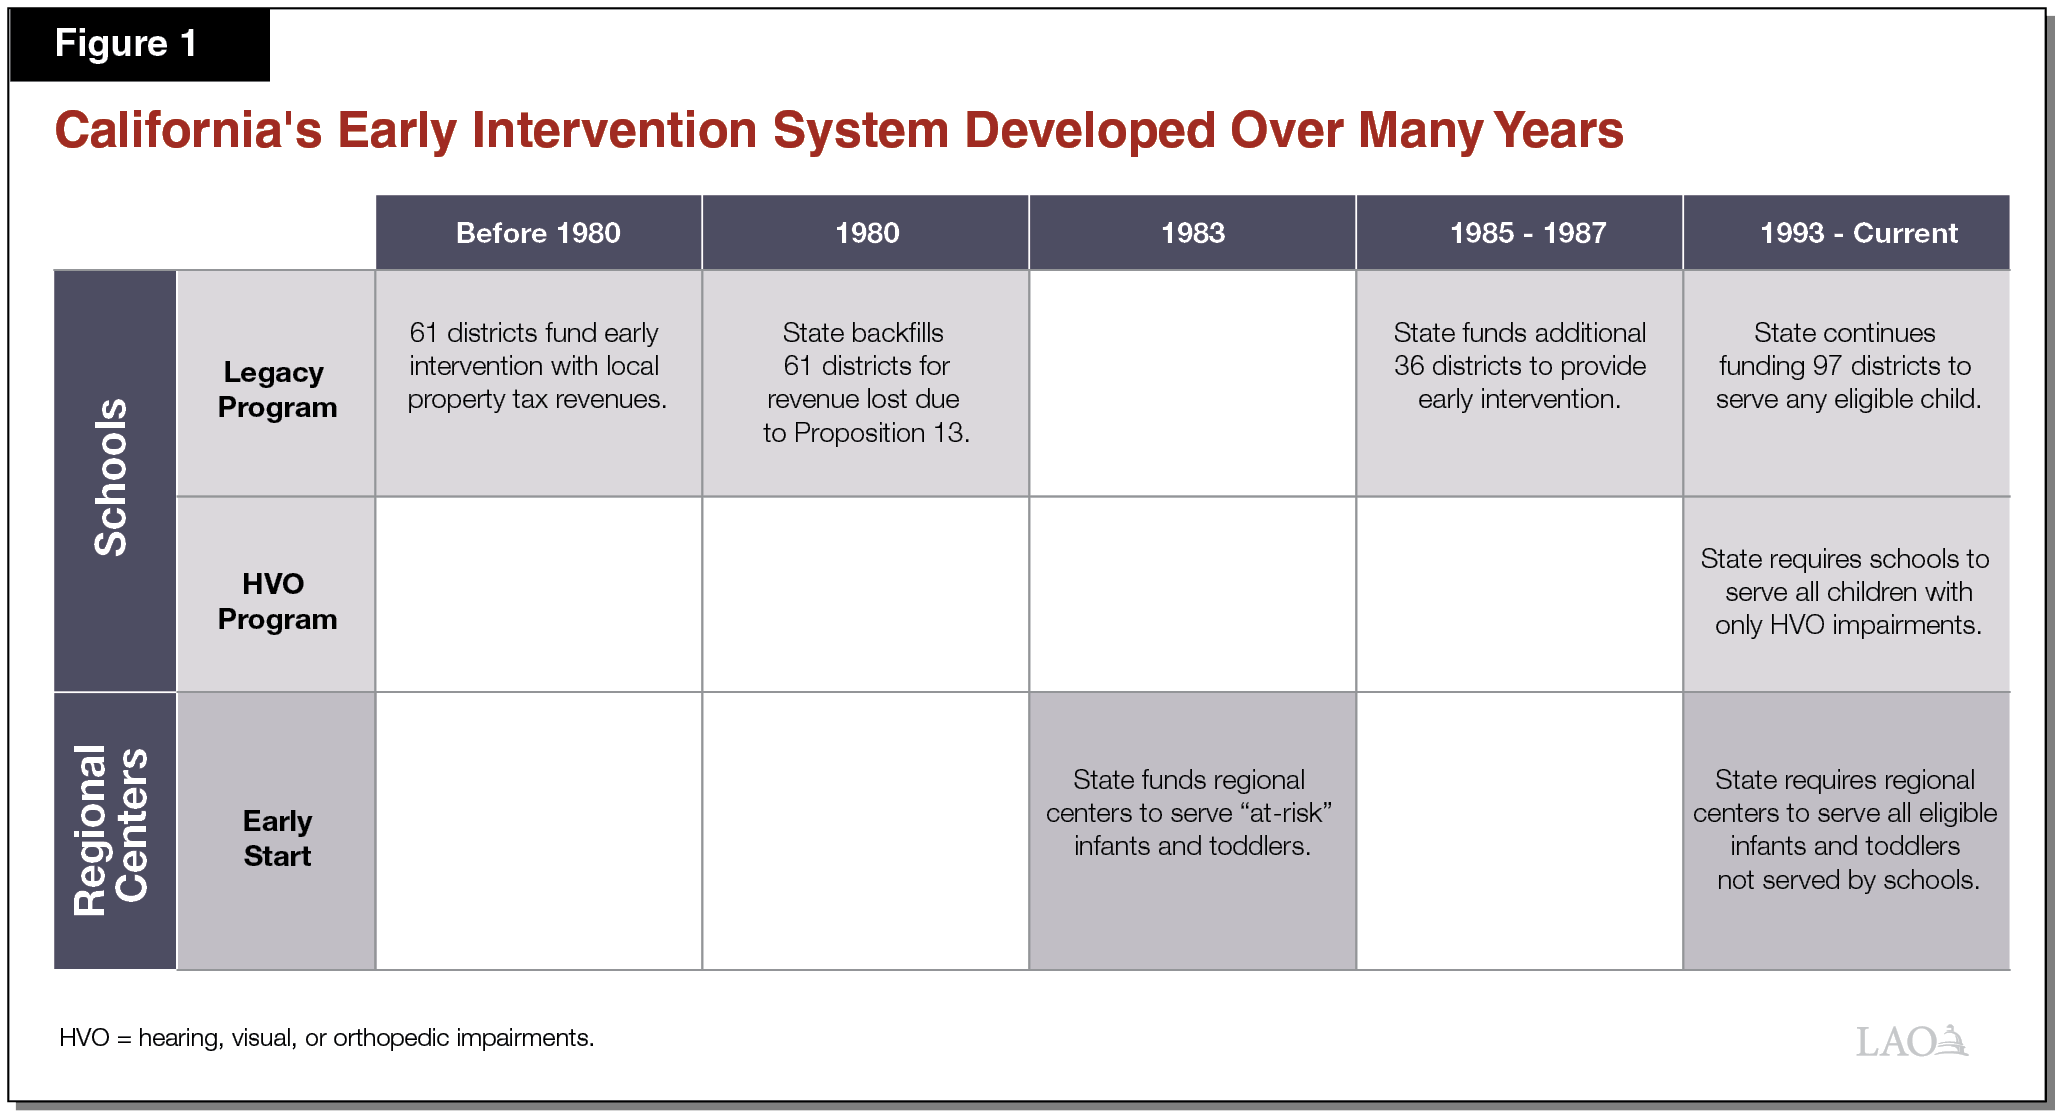 Figure 1 - California's Early Intervention System Developed Over Many Years